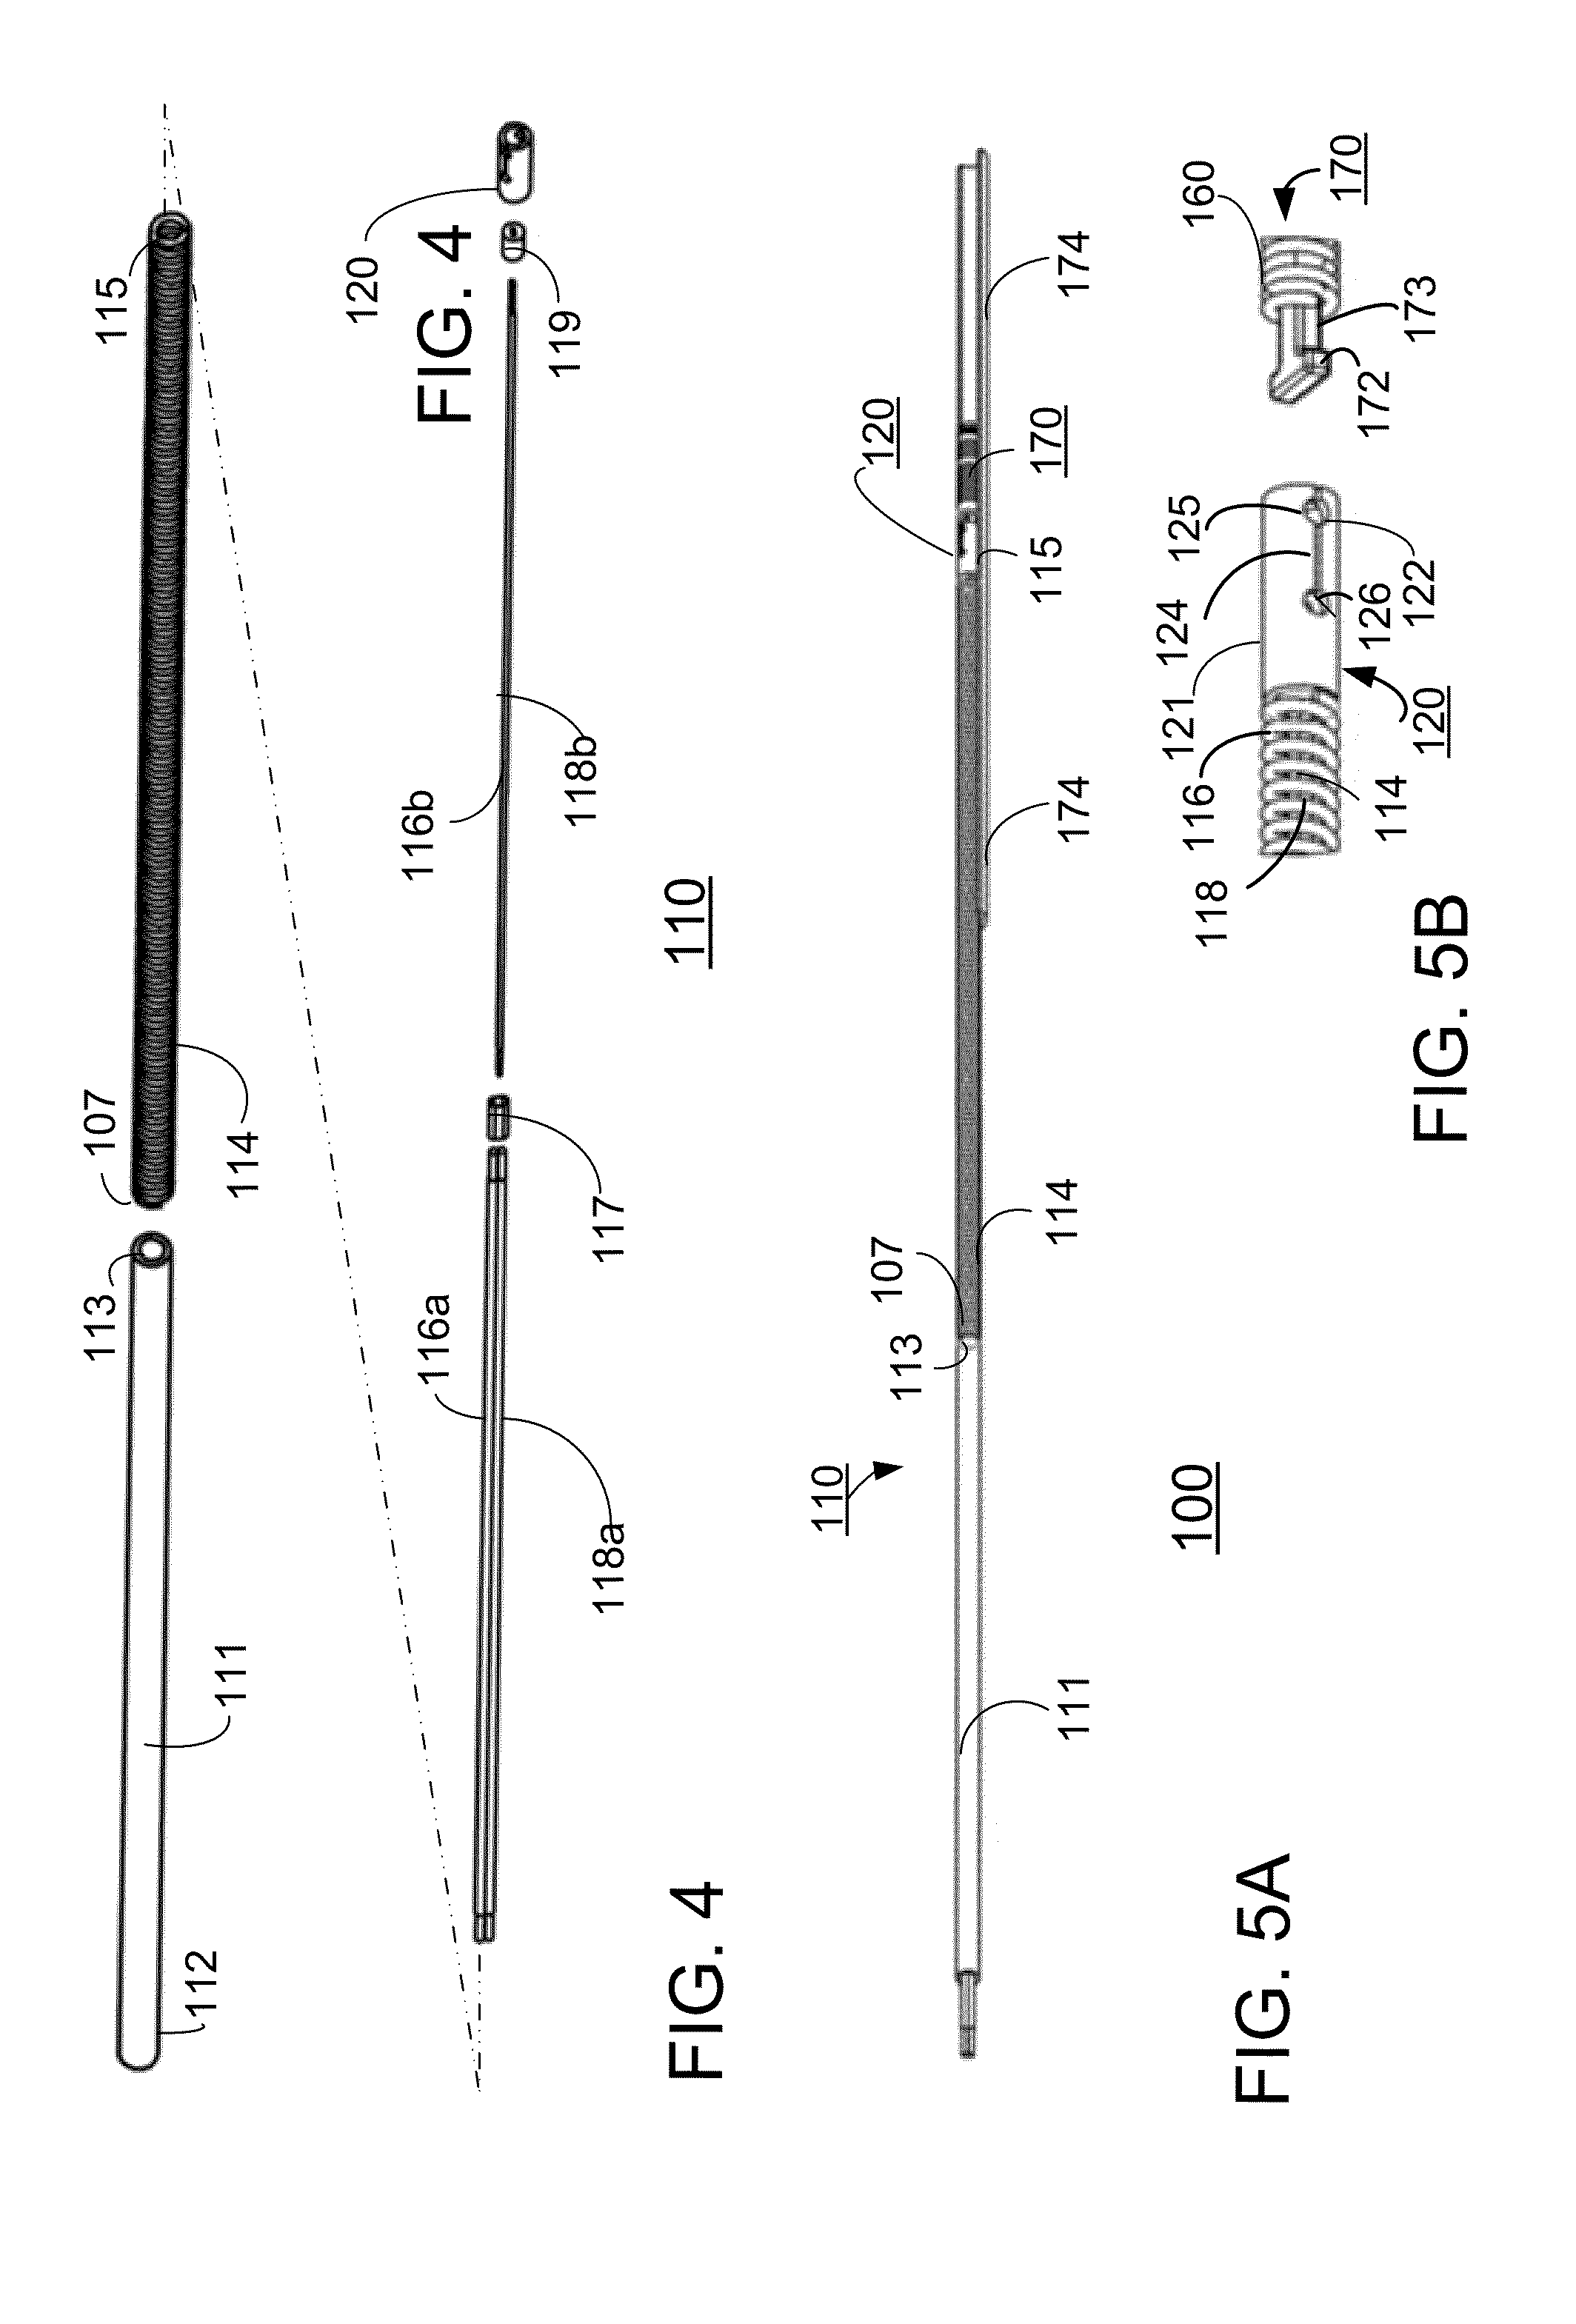 Retractable and rapid disconnect, floating diameter embolic coil product and delivery system